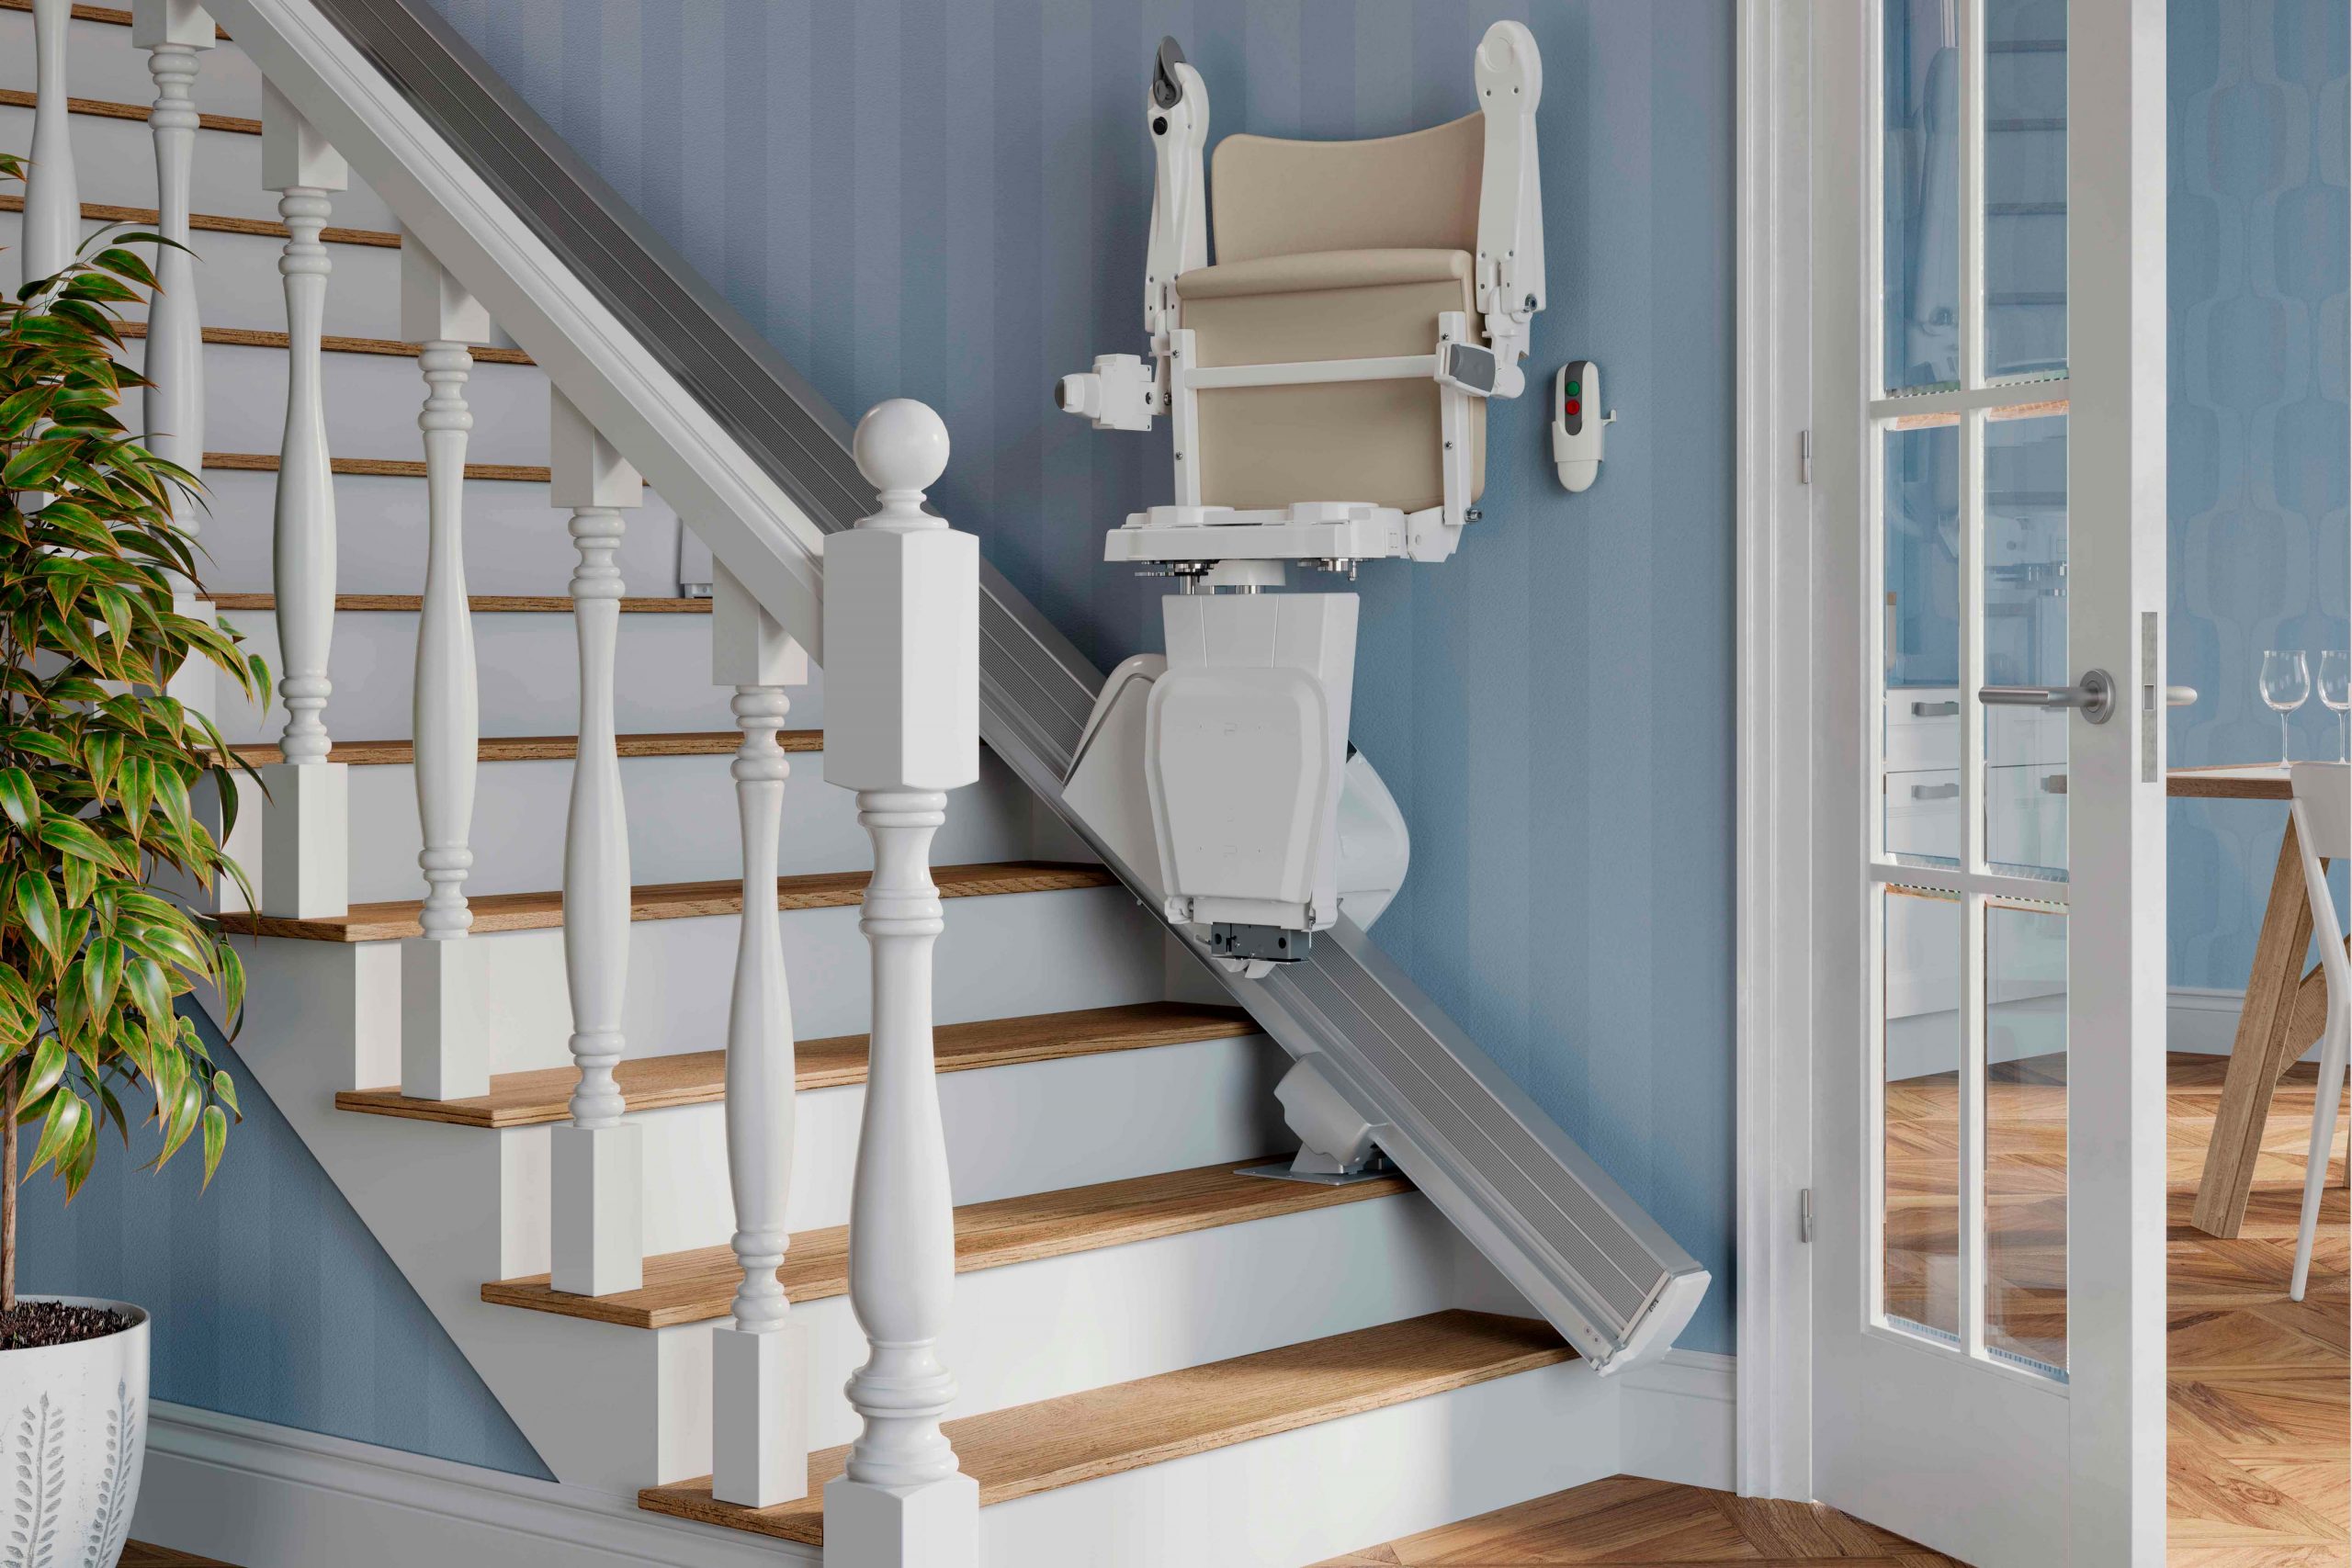 Handicare 1100 Stairlift - Straight Stairlifts